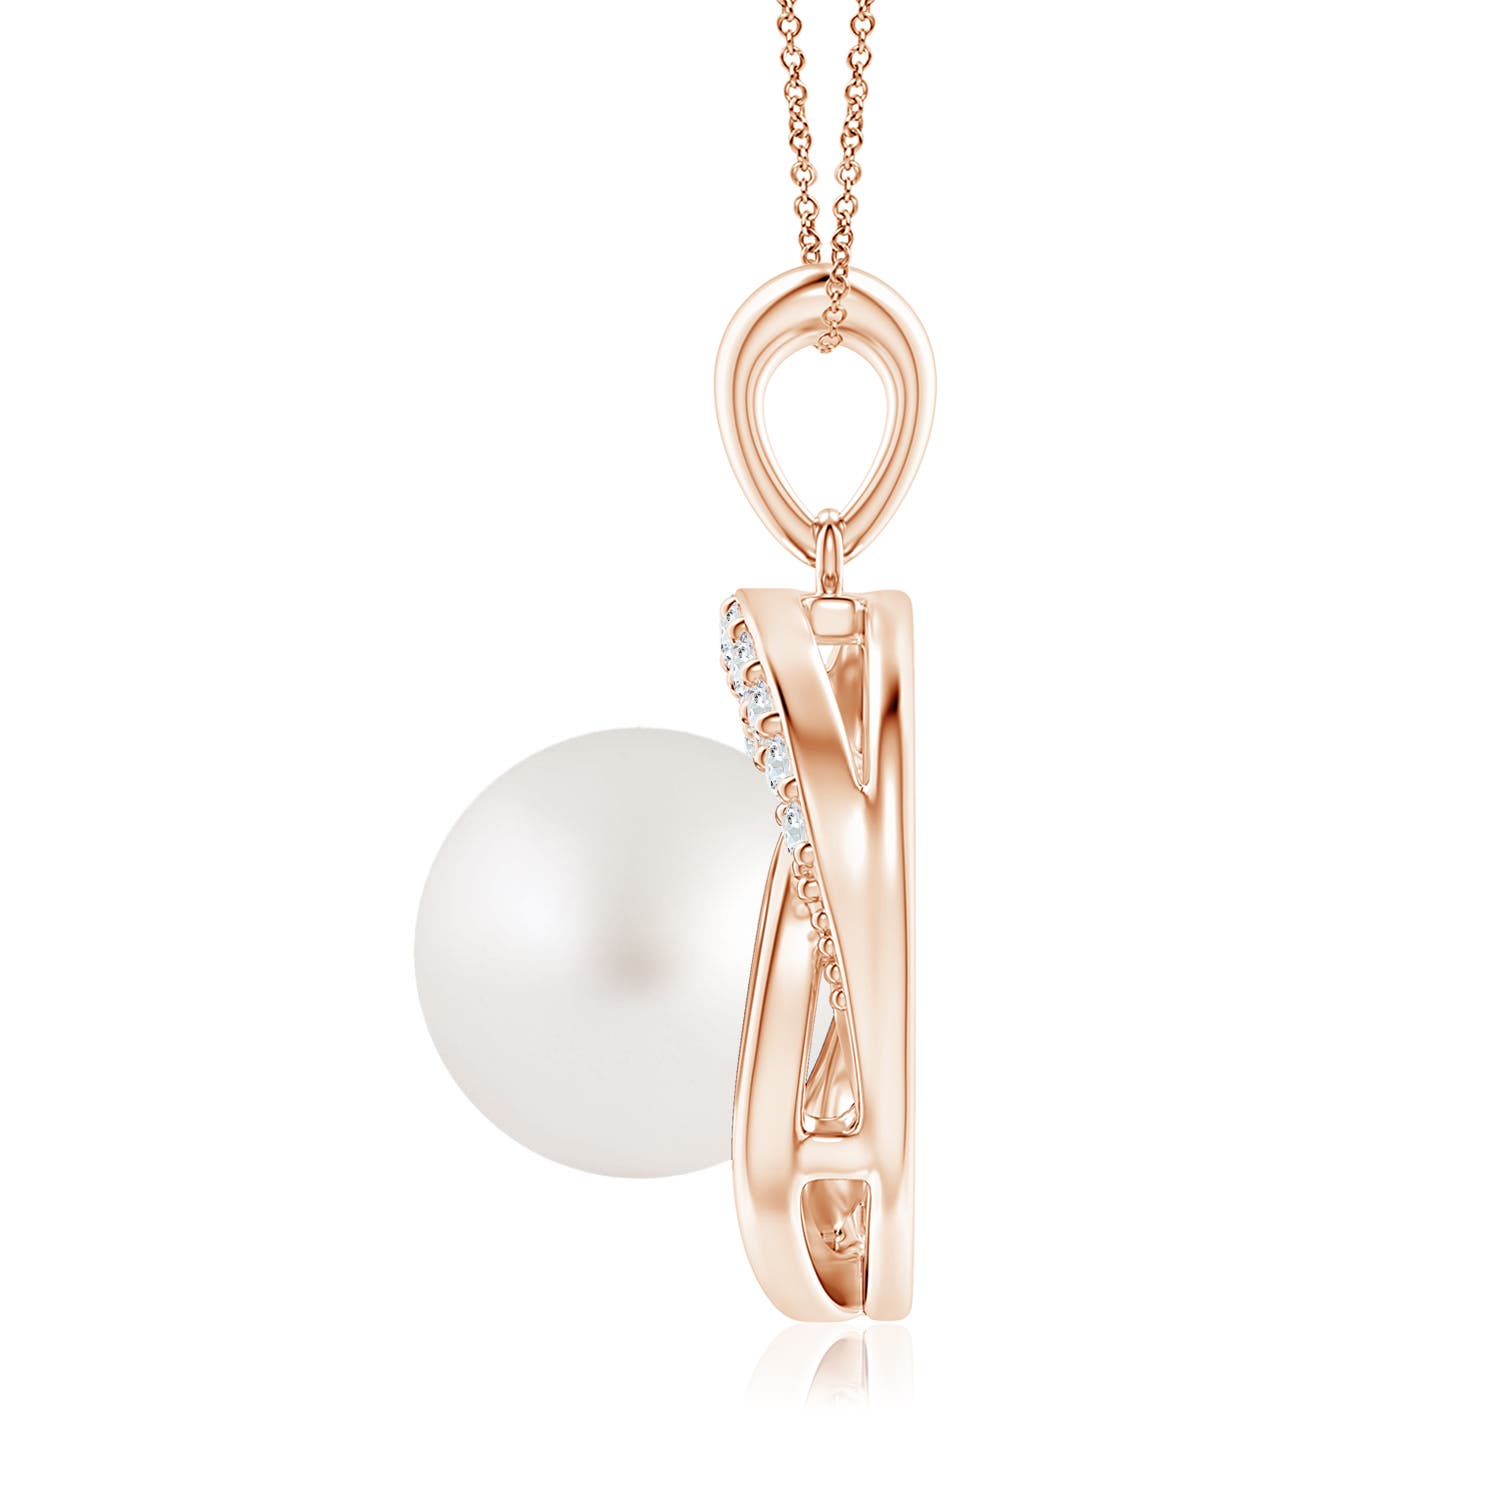 AA - South Sea Cultured Pearl / 7.33 CT / 14 KT Rose Gold